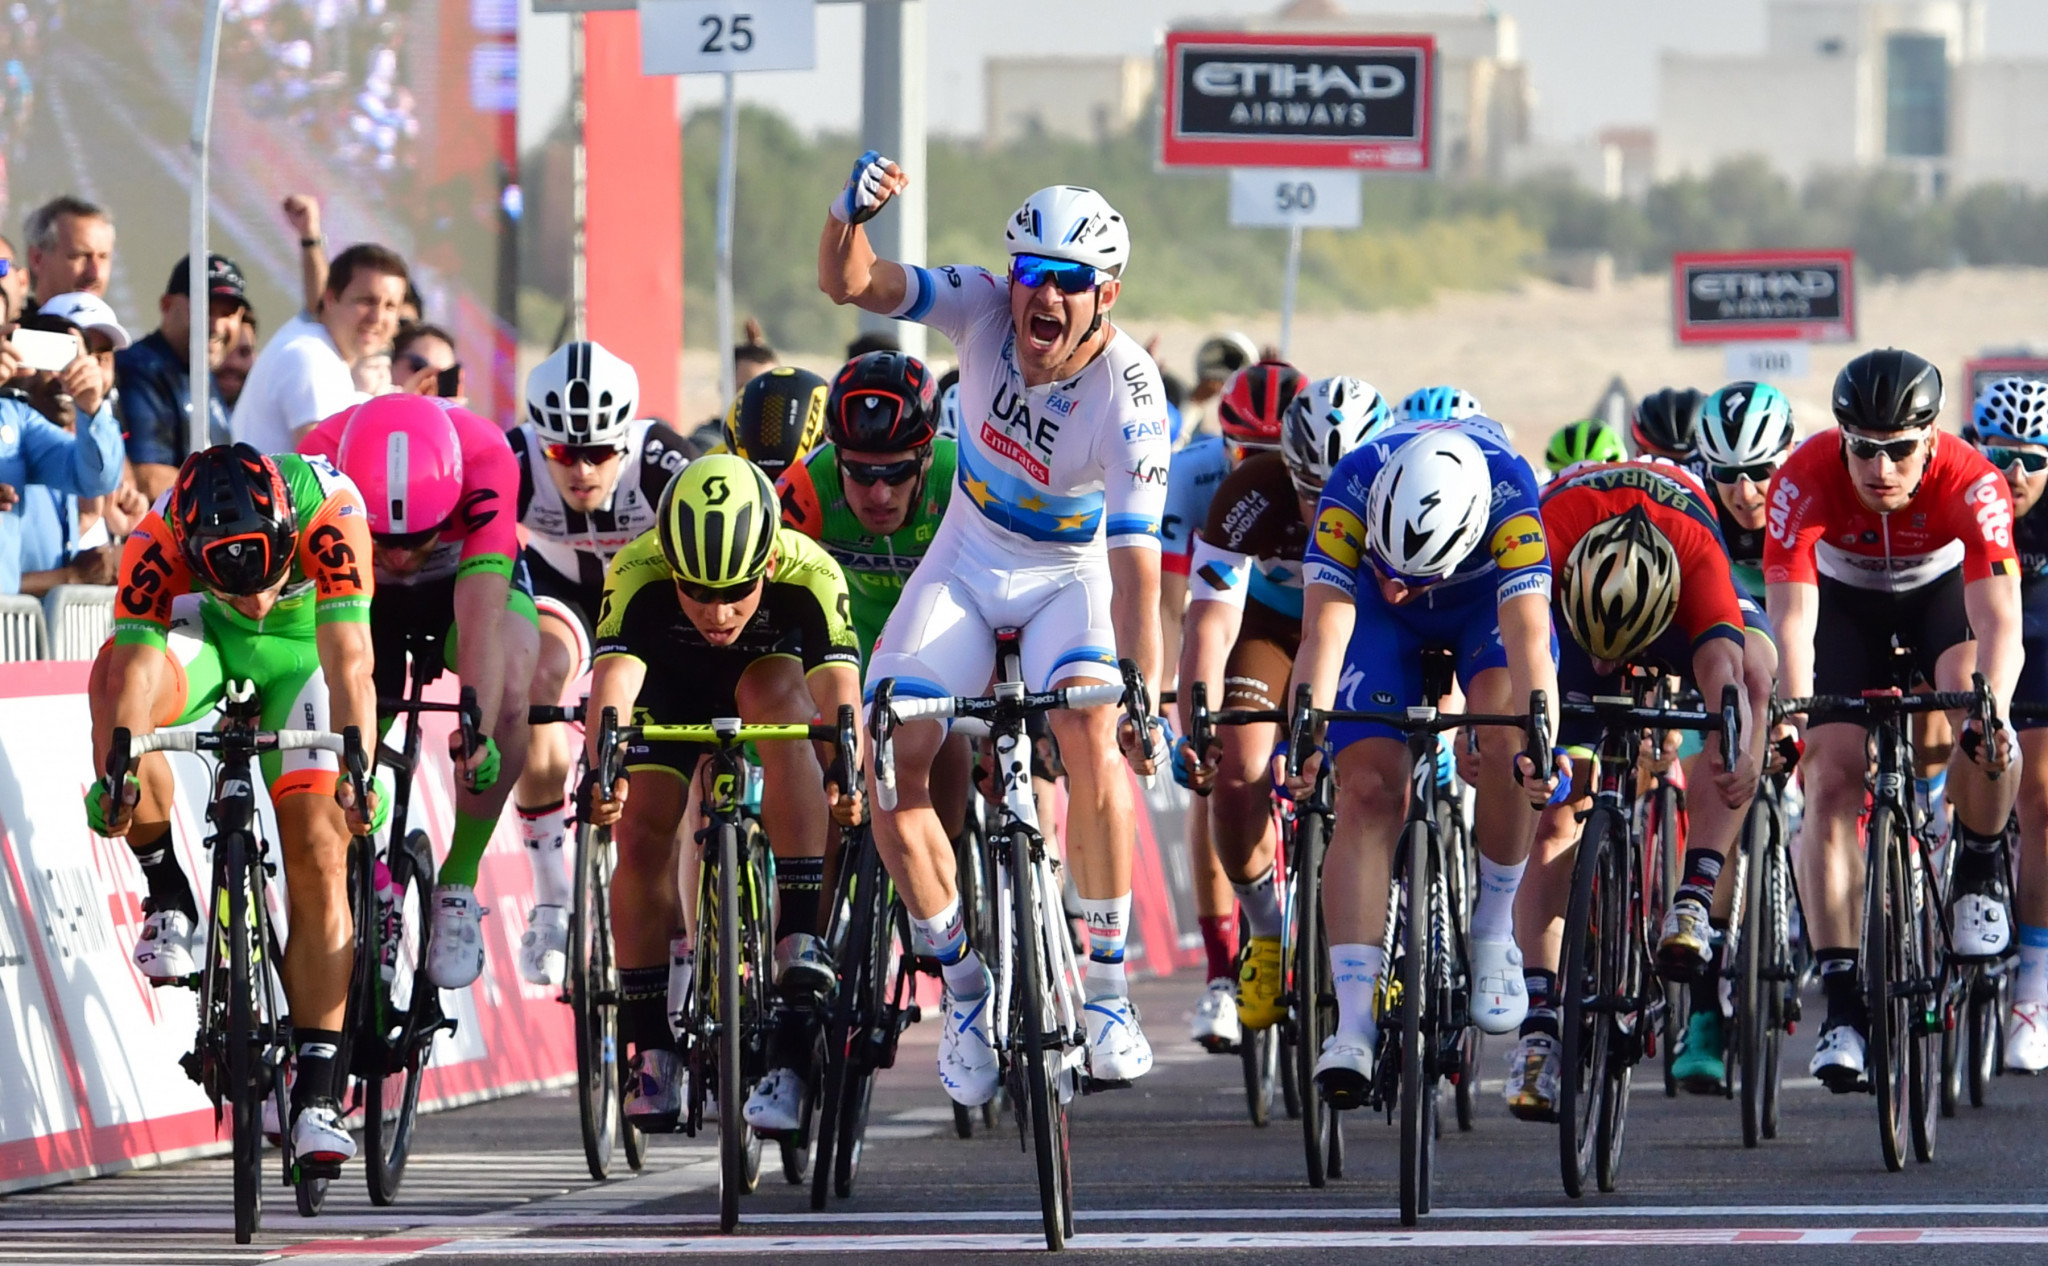 Kristoff wins first stage of Abu Dhabi Tour as Cavendish crashes out